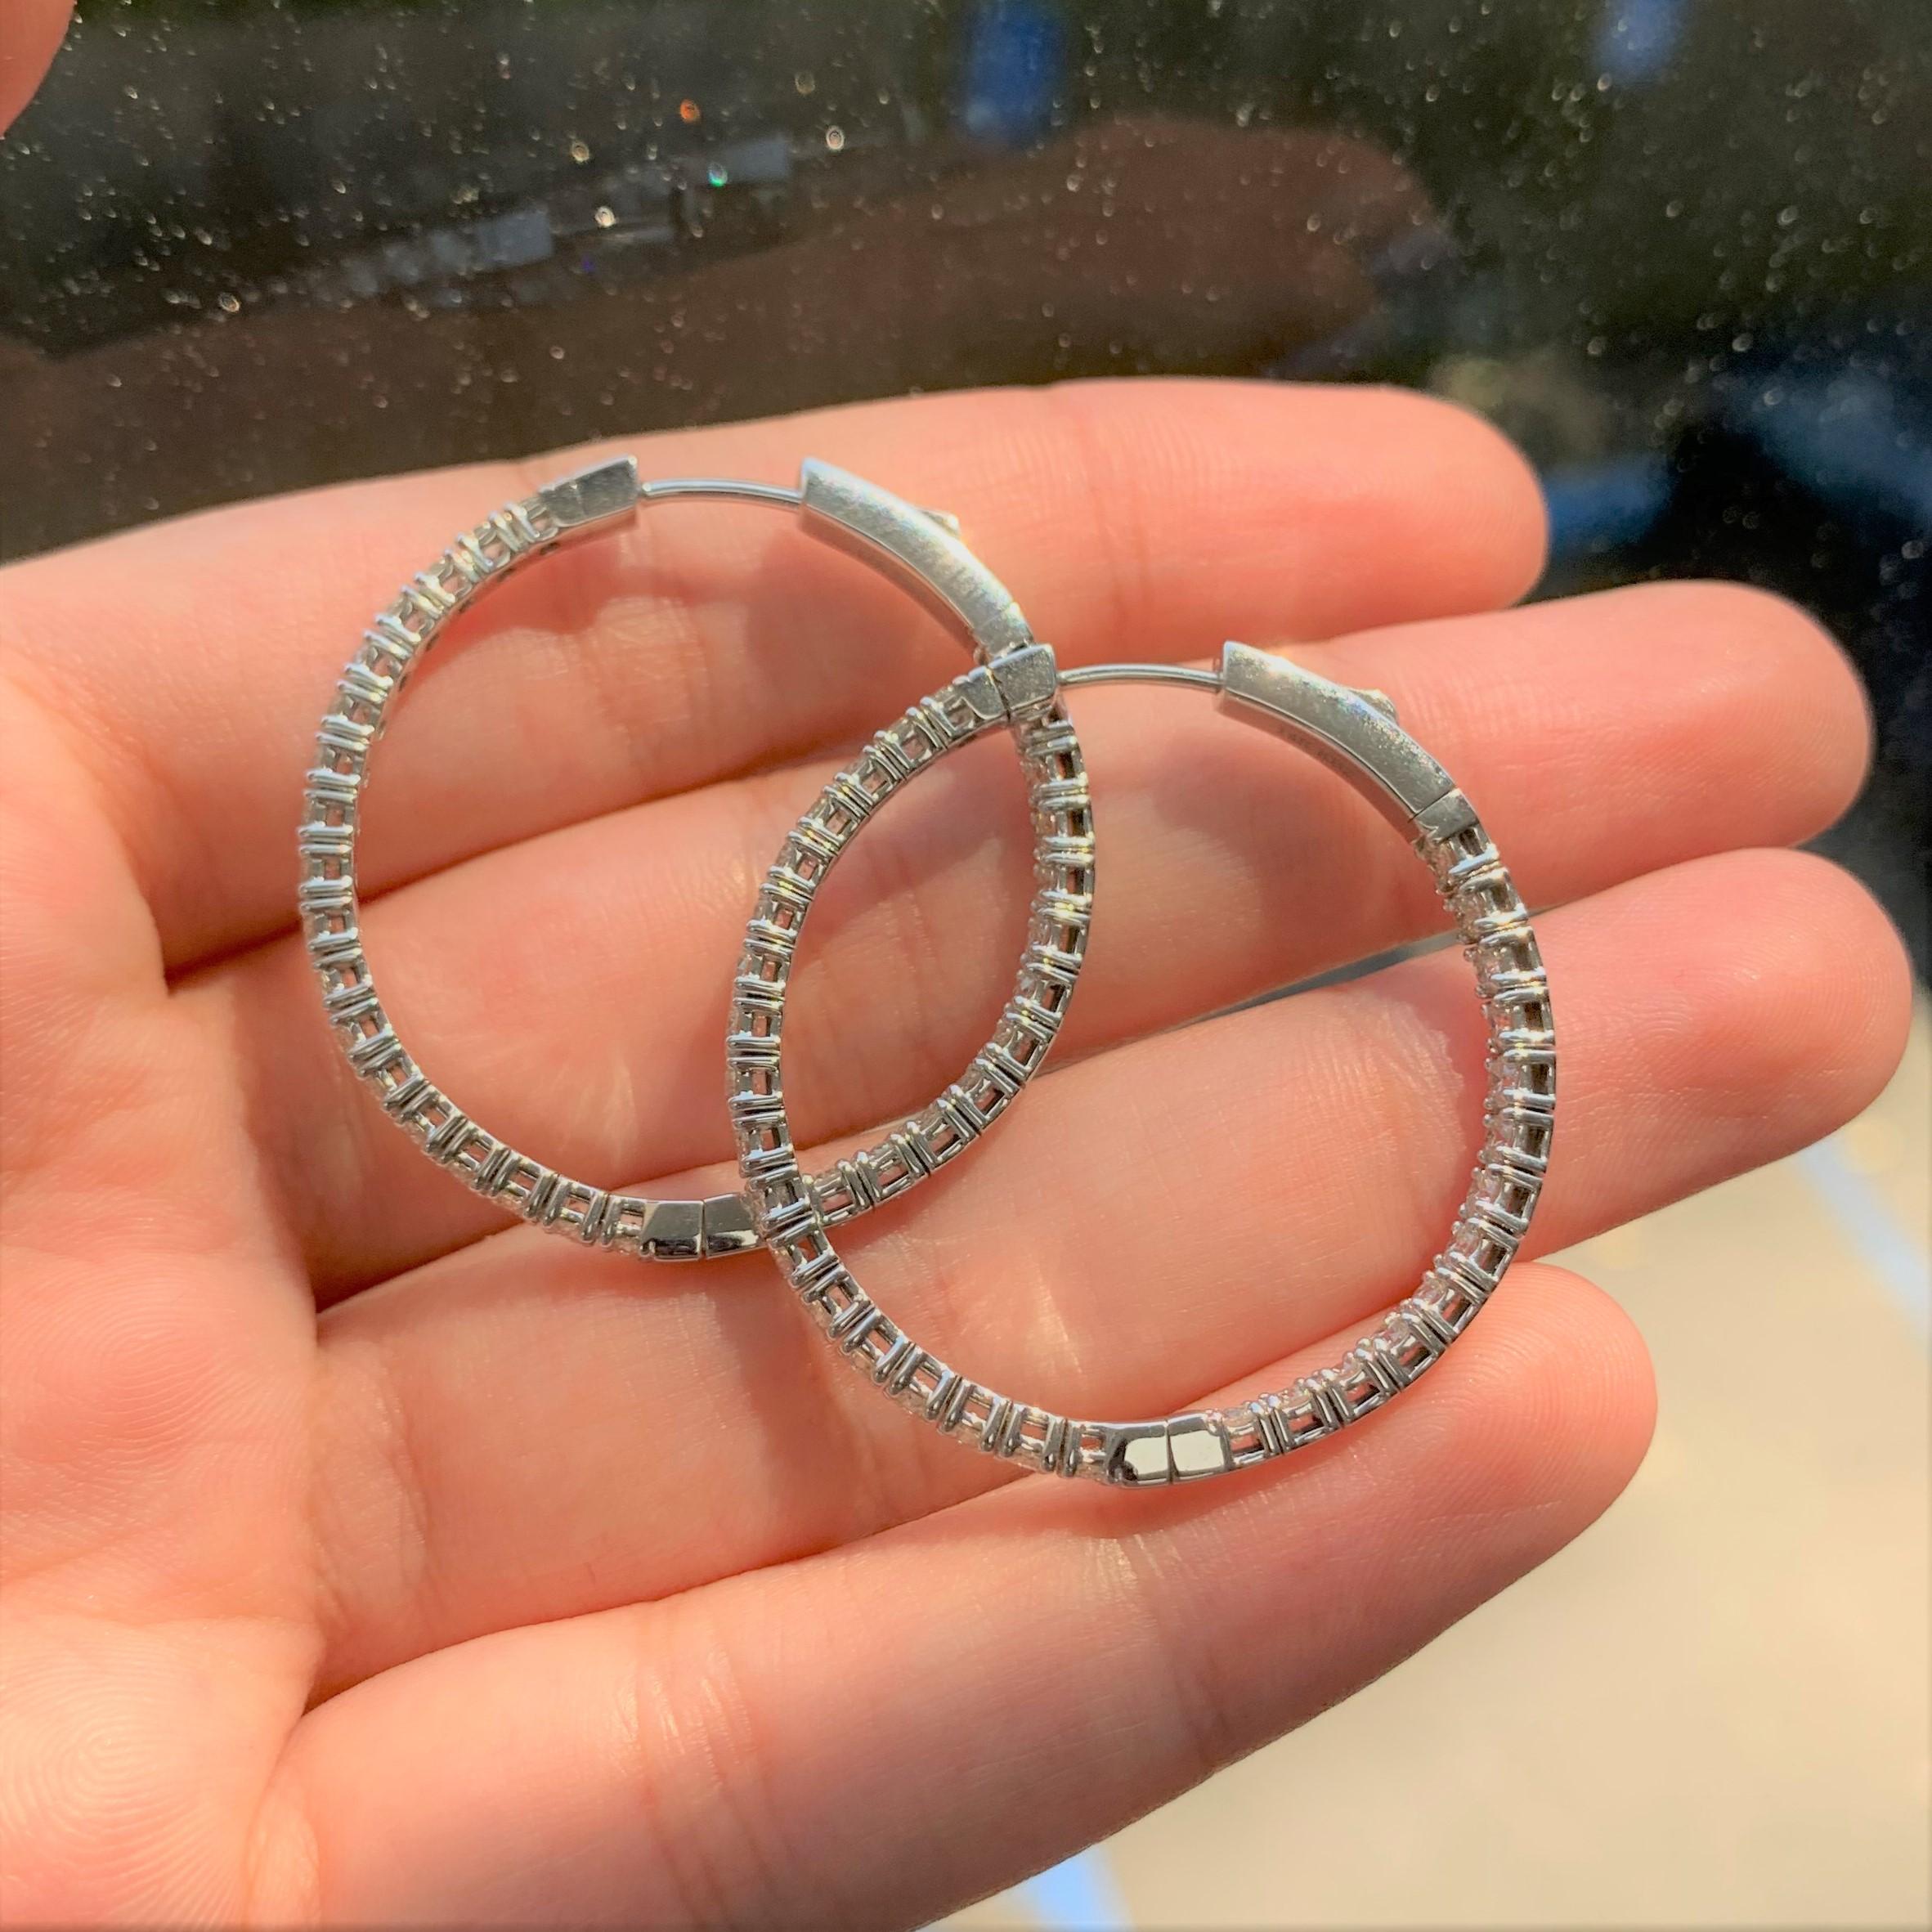 These Classic and Elegant Diamond Oval Hoop Earrings will frame your face beautifully! Crafted of 14K White Gold these earrings feature approximately 2.75 ct. of Natural Round Diamonds. Diamond Color and Clarity is GH-SI1. Insert Latch for